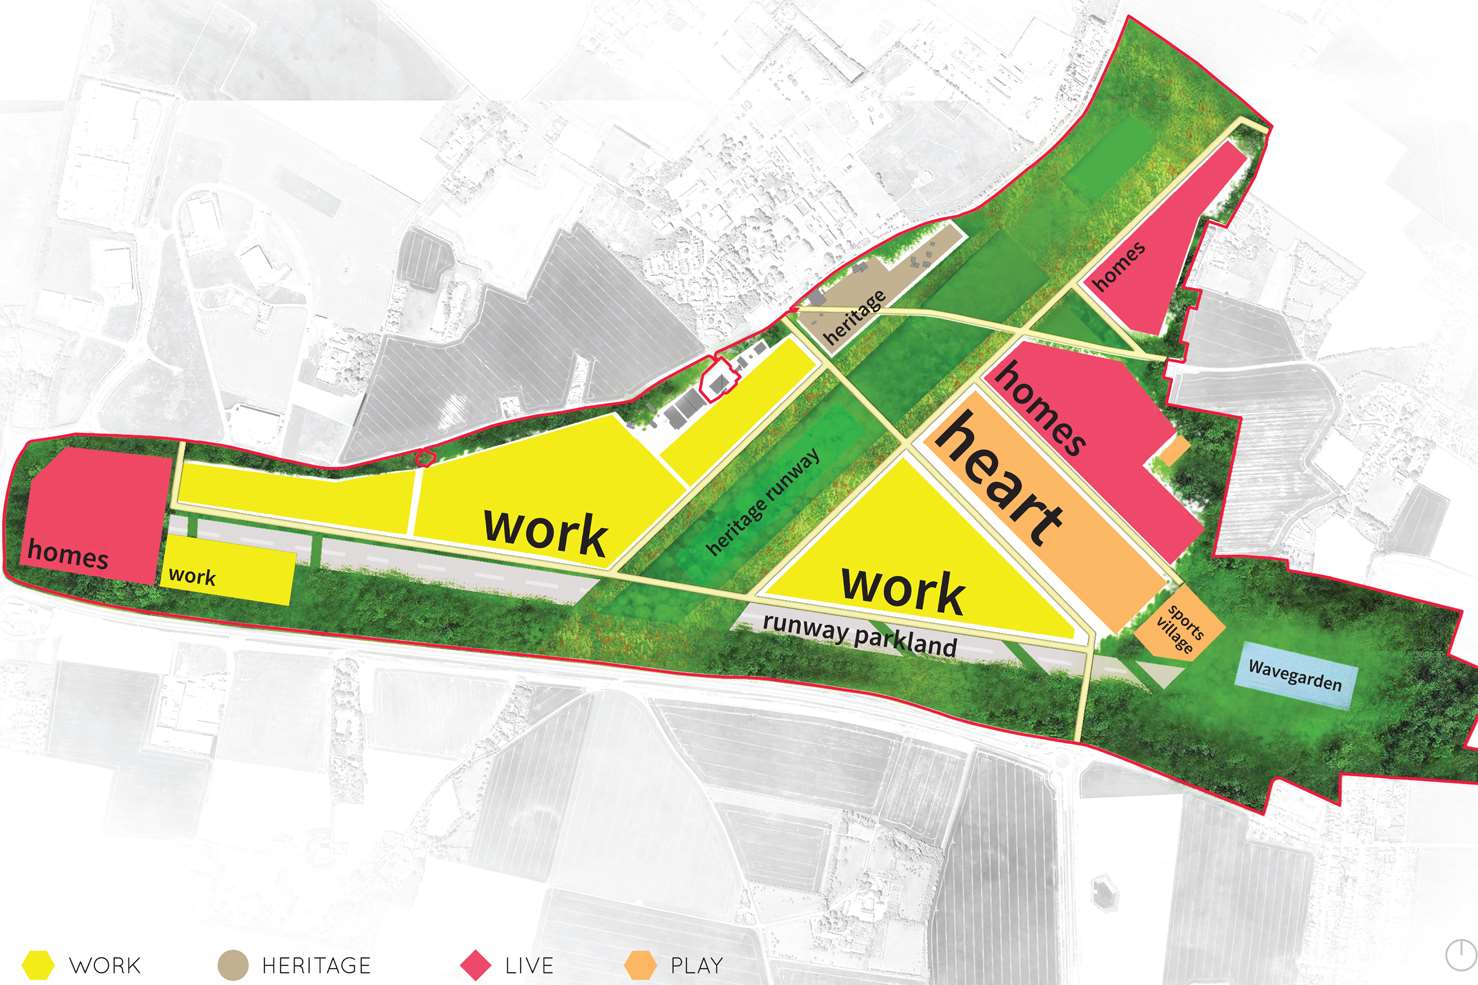 The original masterplan for Stone Hill Park submitted in May 2016